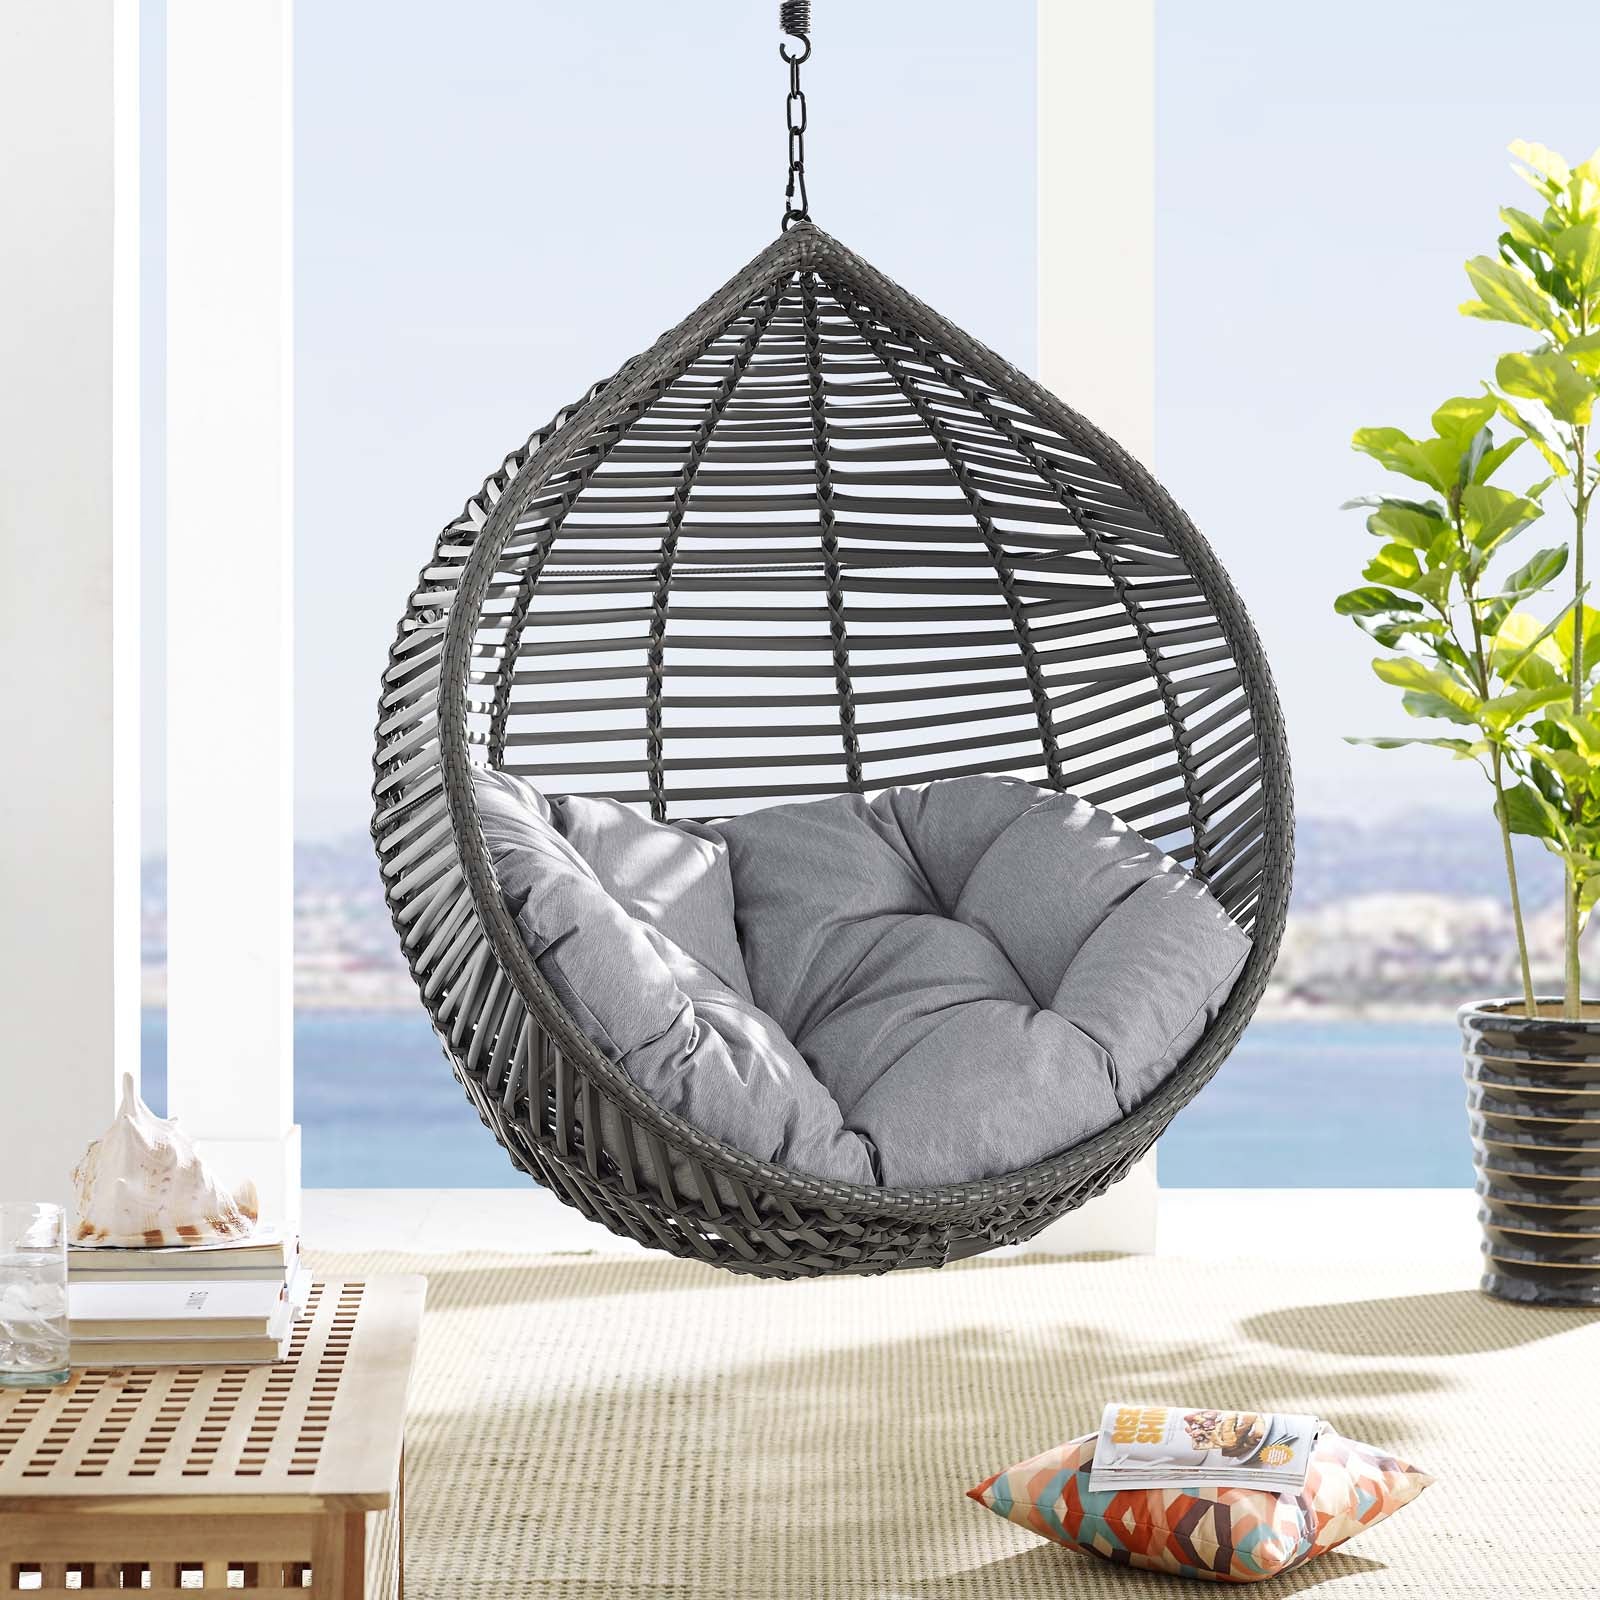 Garner Teardrop Outdoor Patio Swing Chair Without Stand - East Shore Modern Home Furnishings